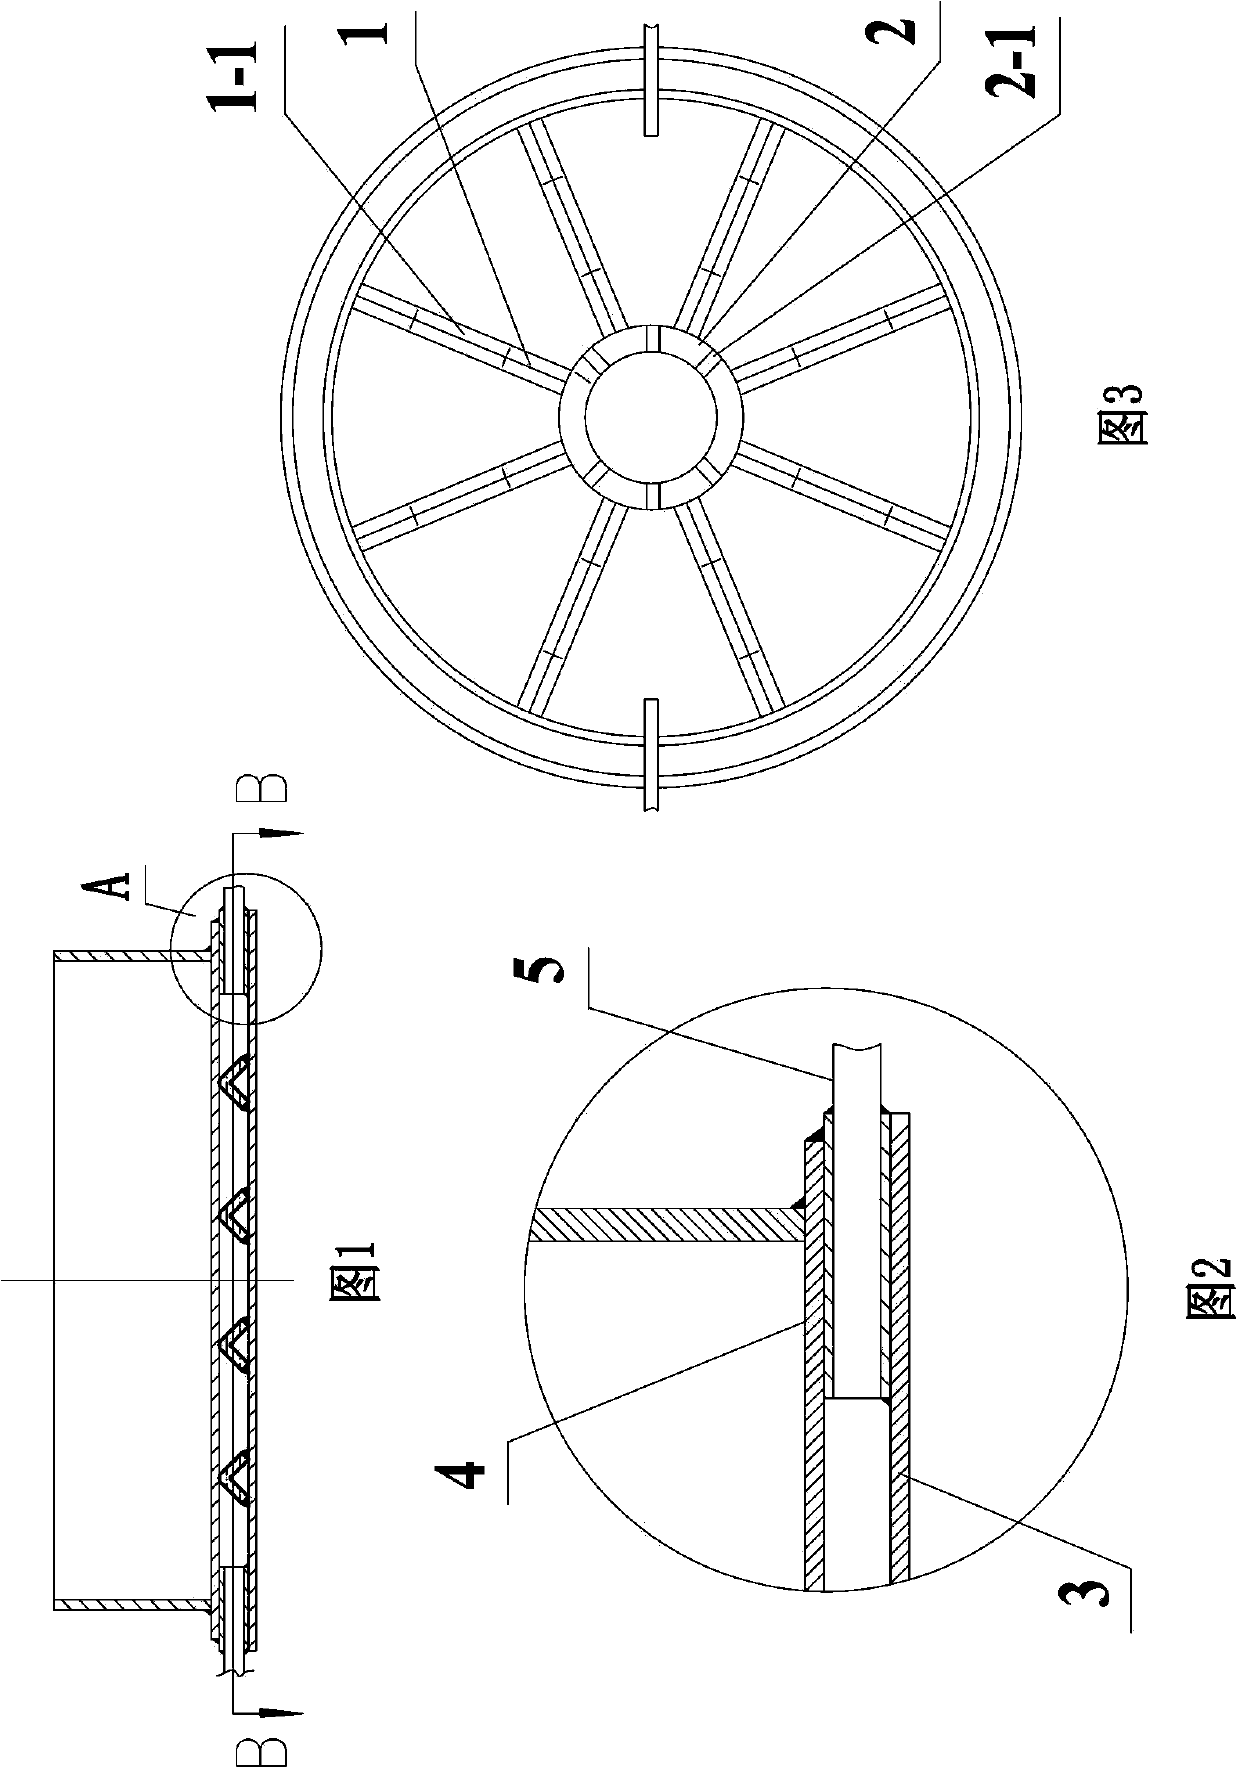 Vertical storage tank leakage monitoring system with dual-layer tank bottom plate structure